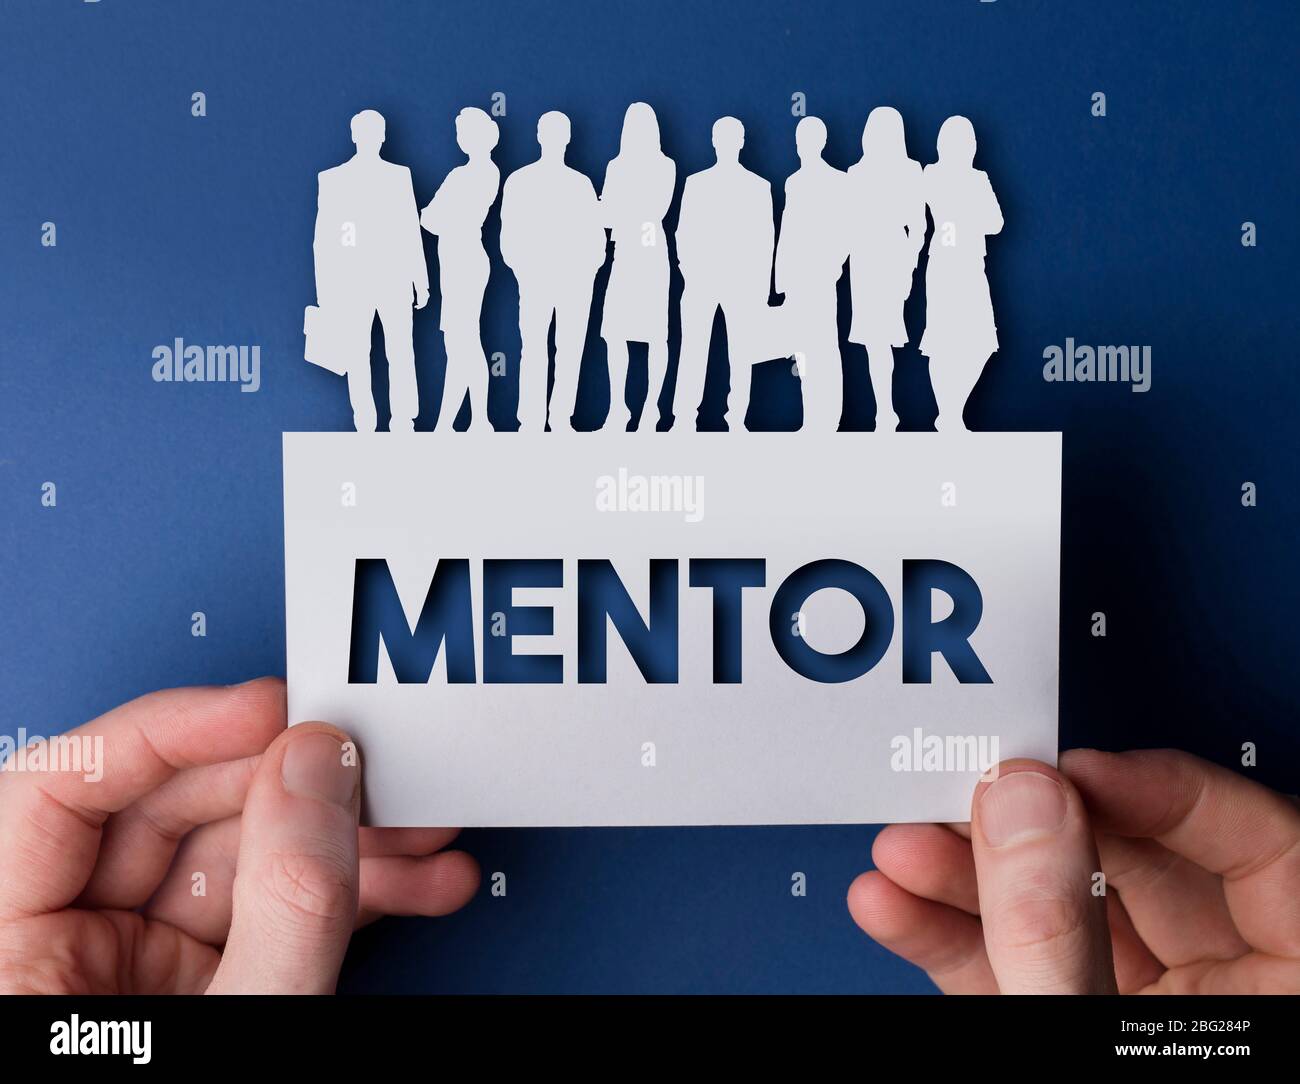 Hands holding a mentor white card business team people sign Stock Photo